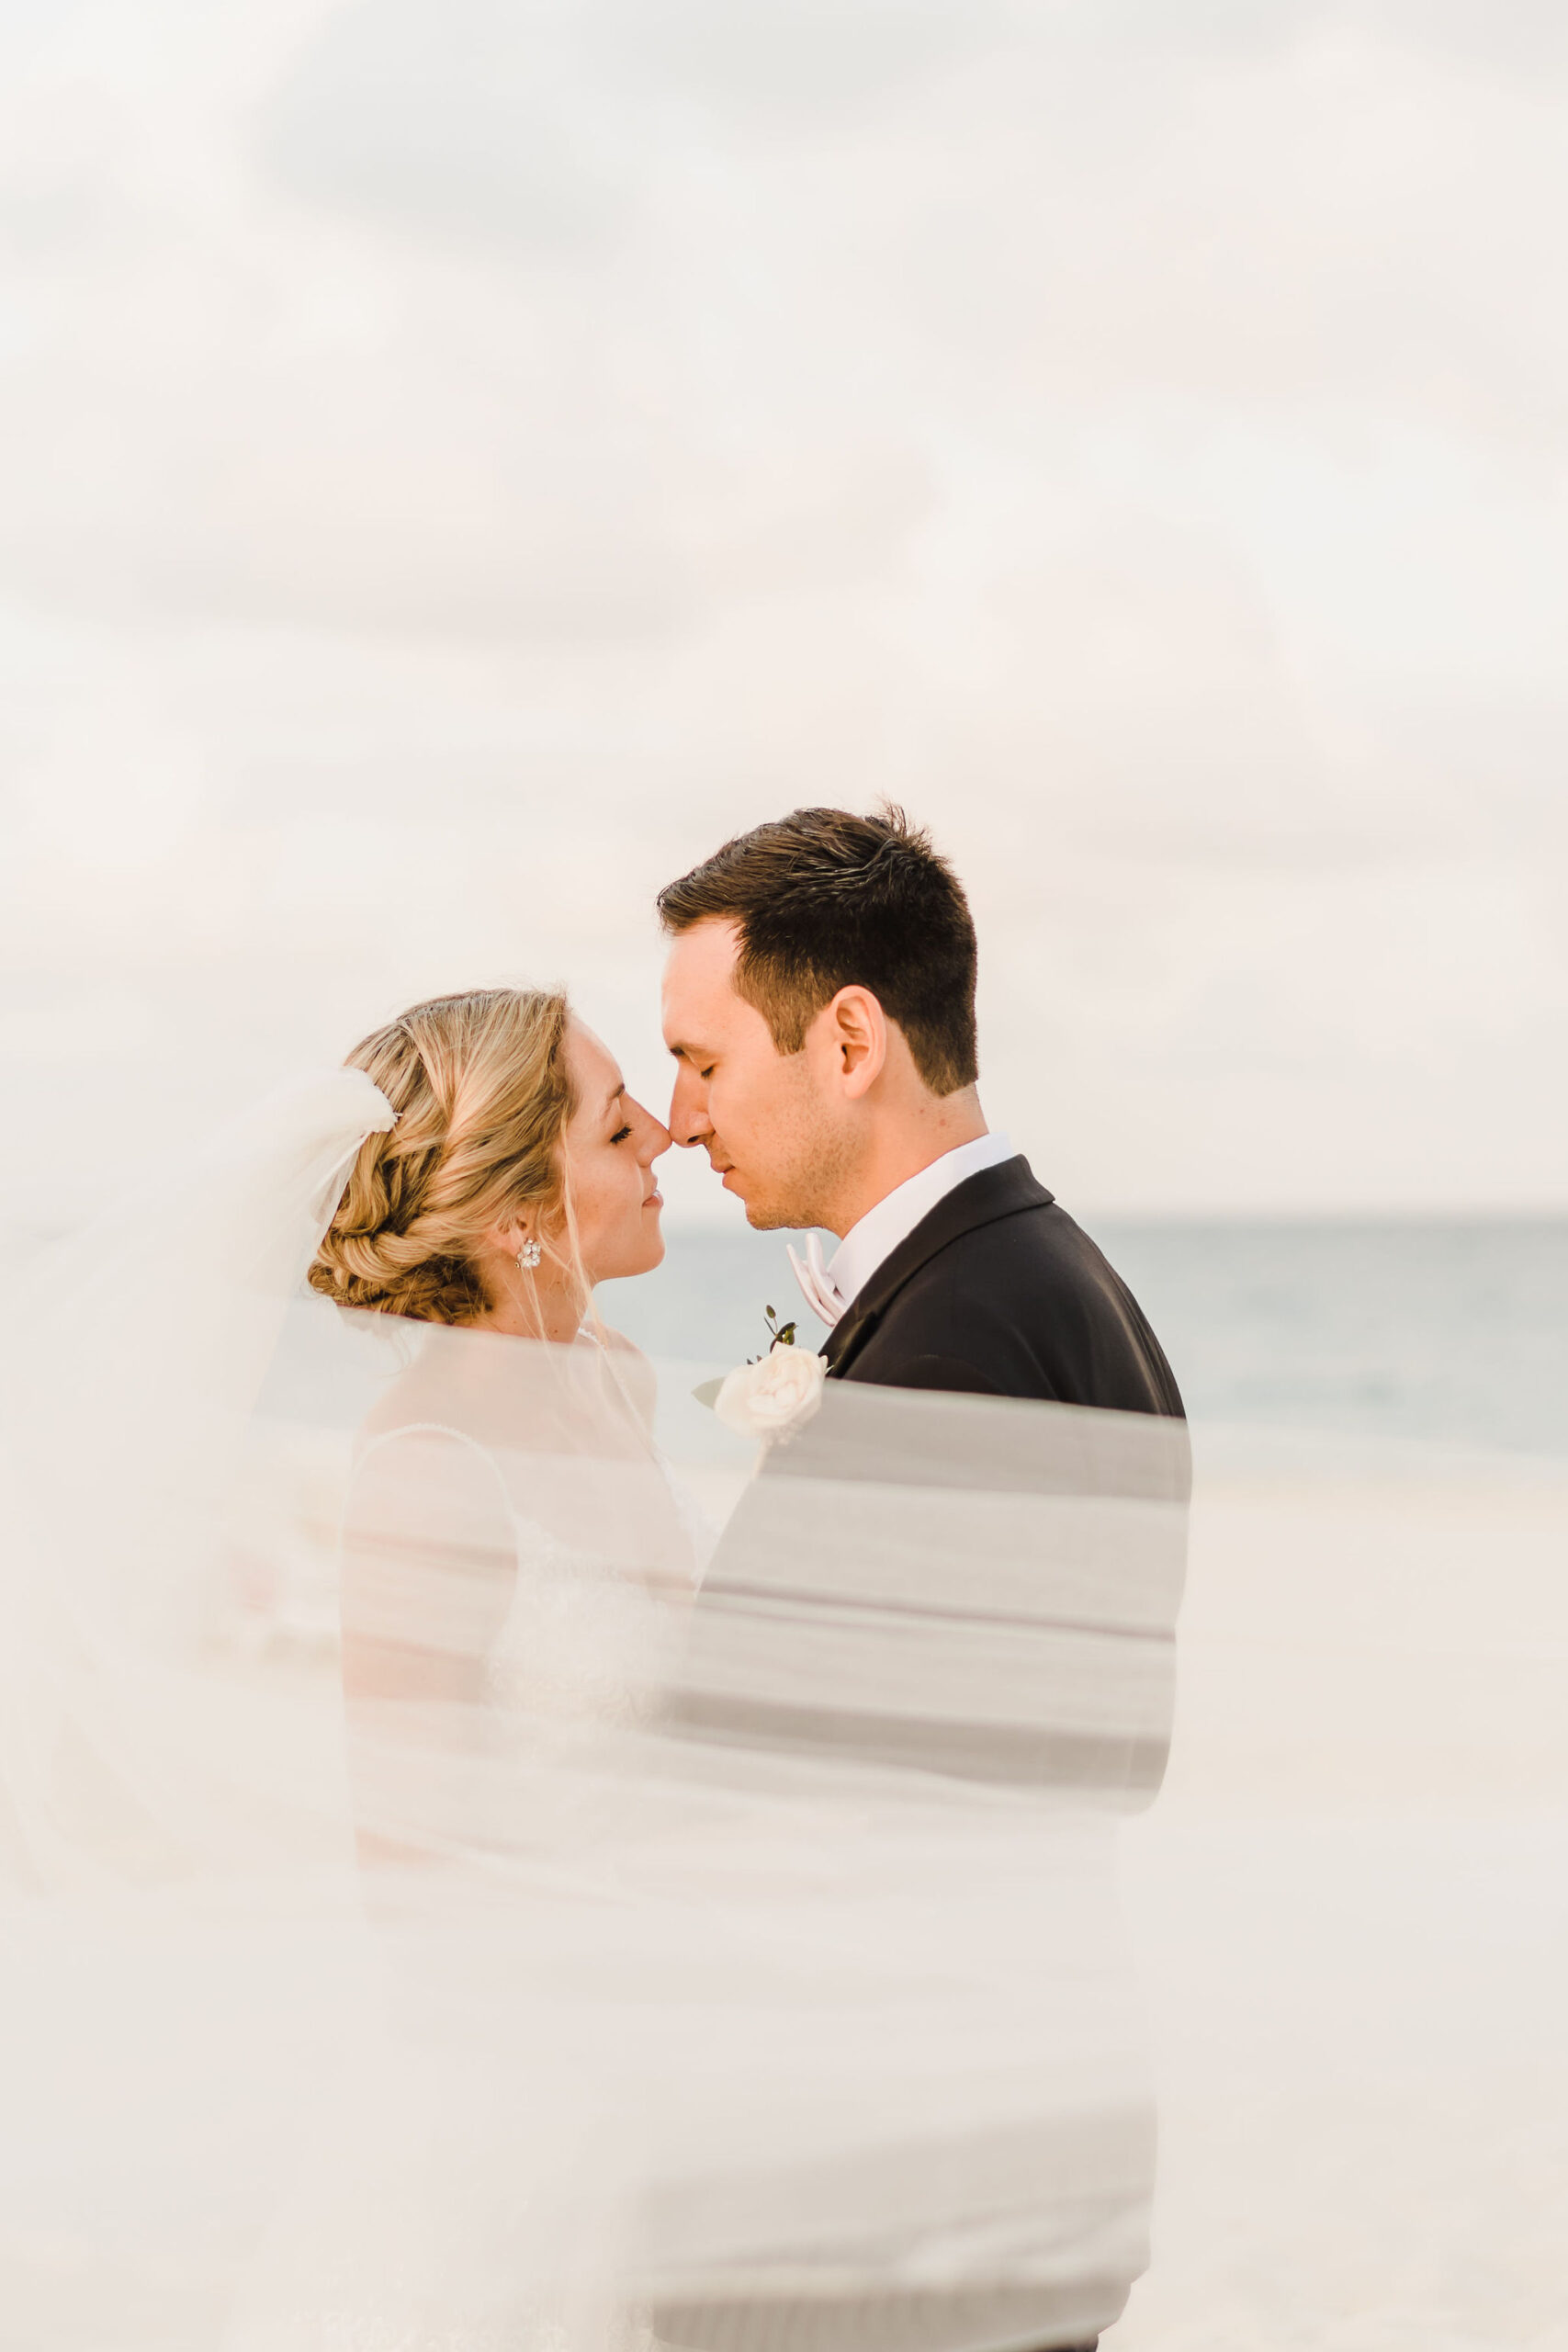 bride and groom embrace on a beach while veil swoops across them.